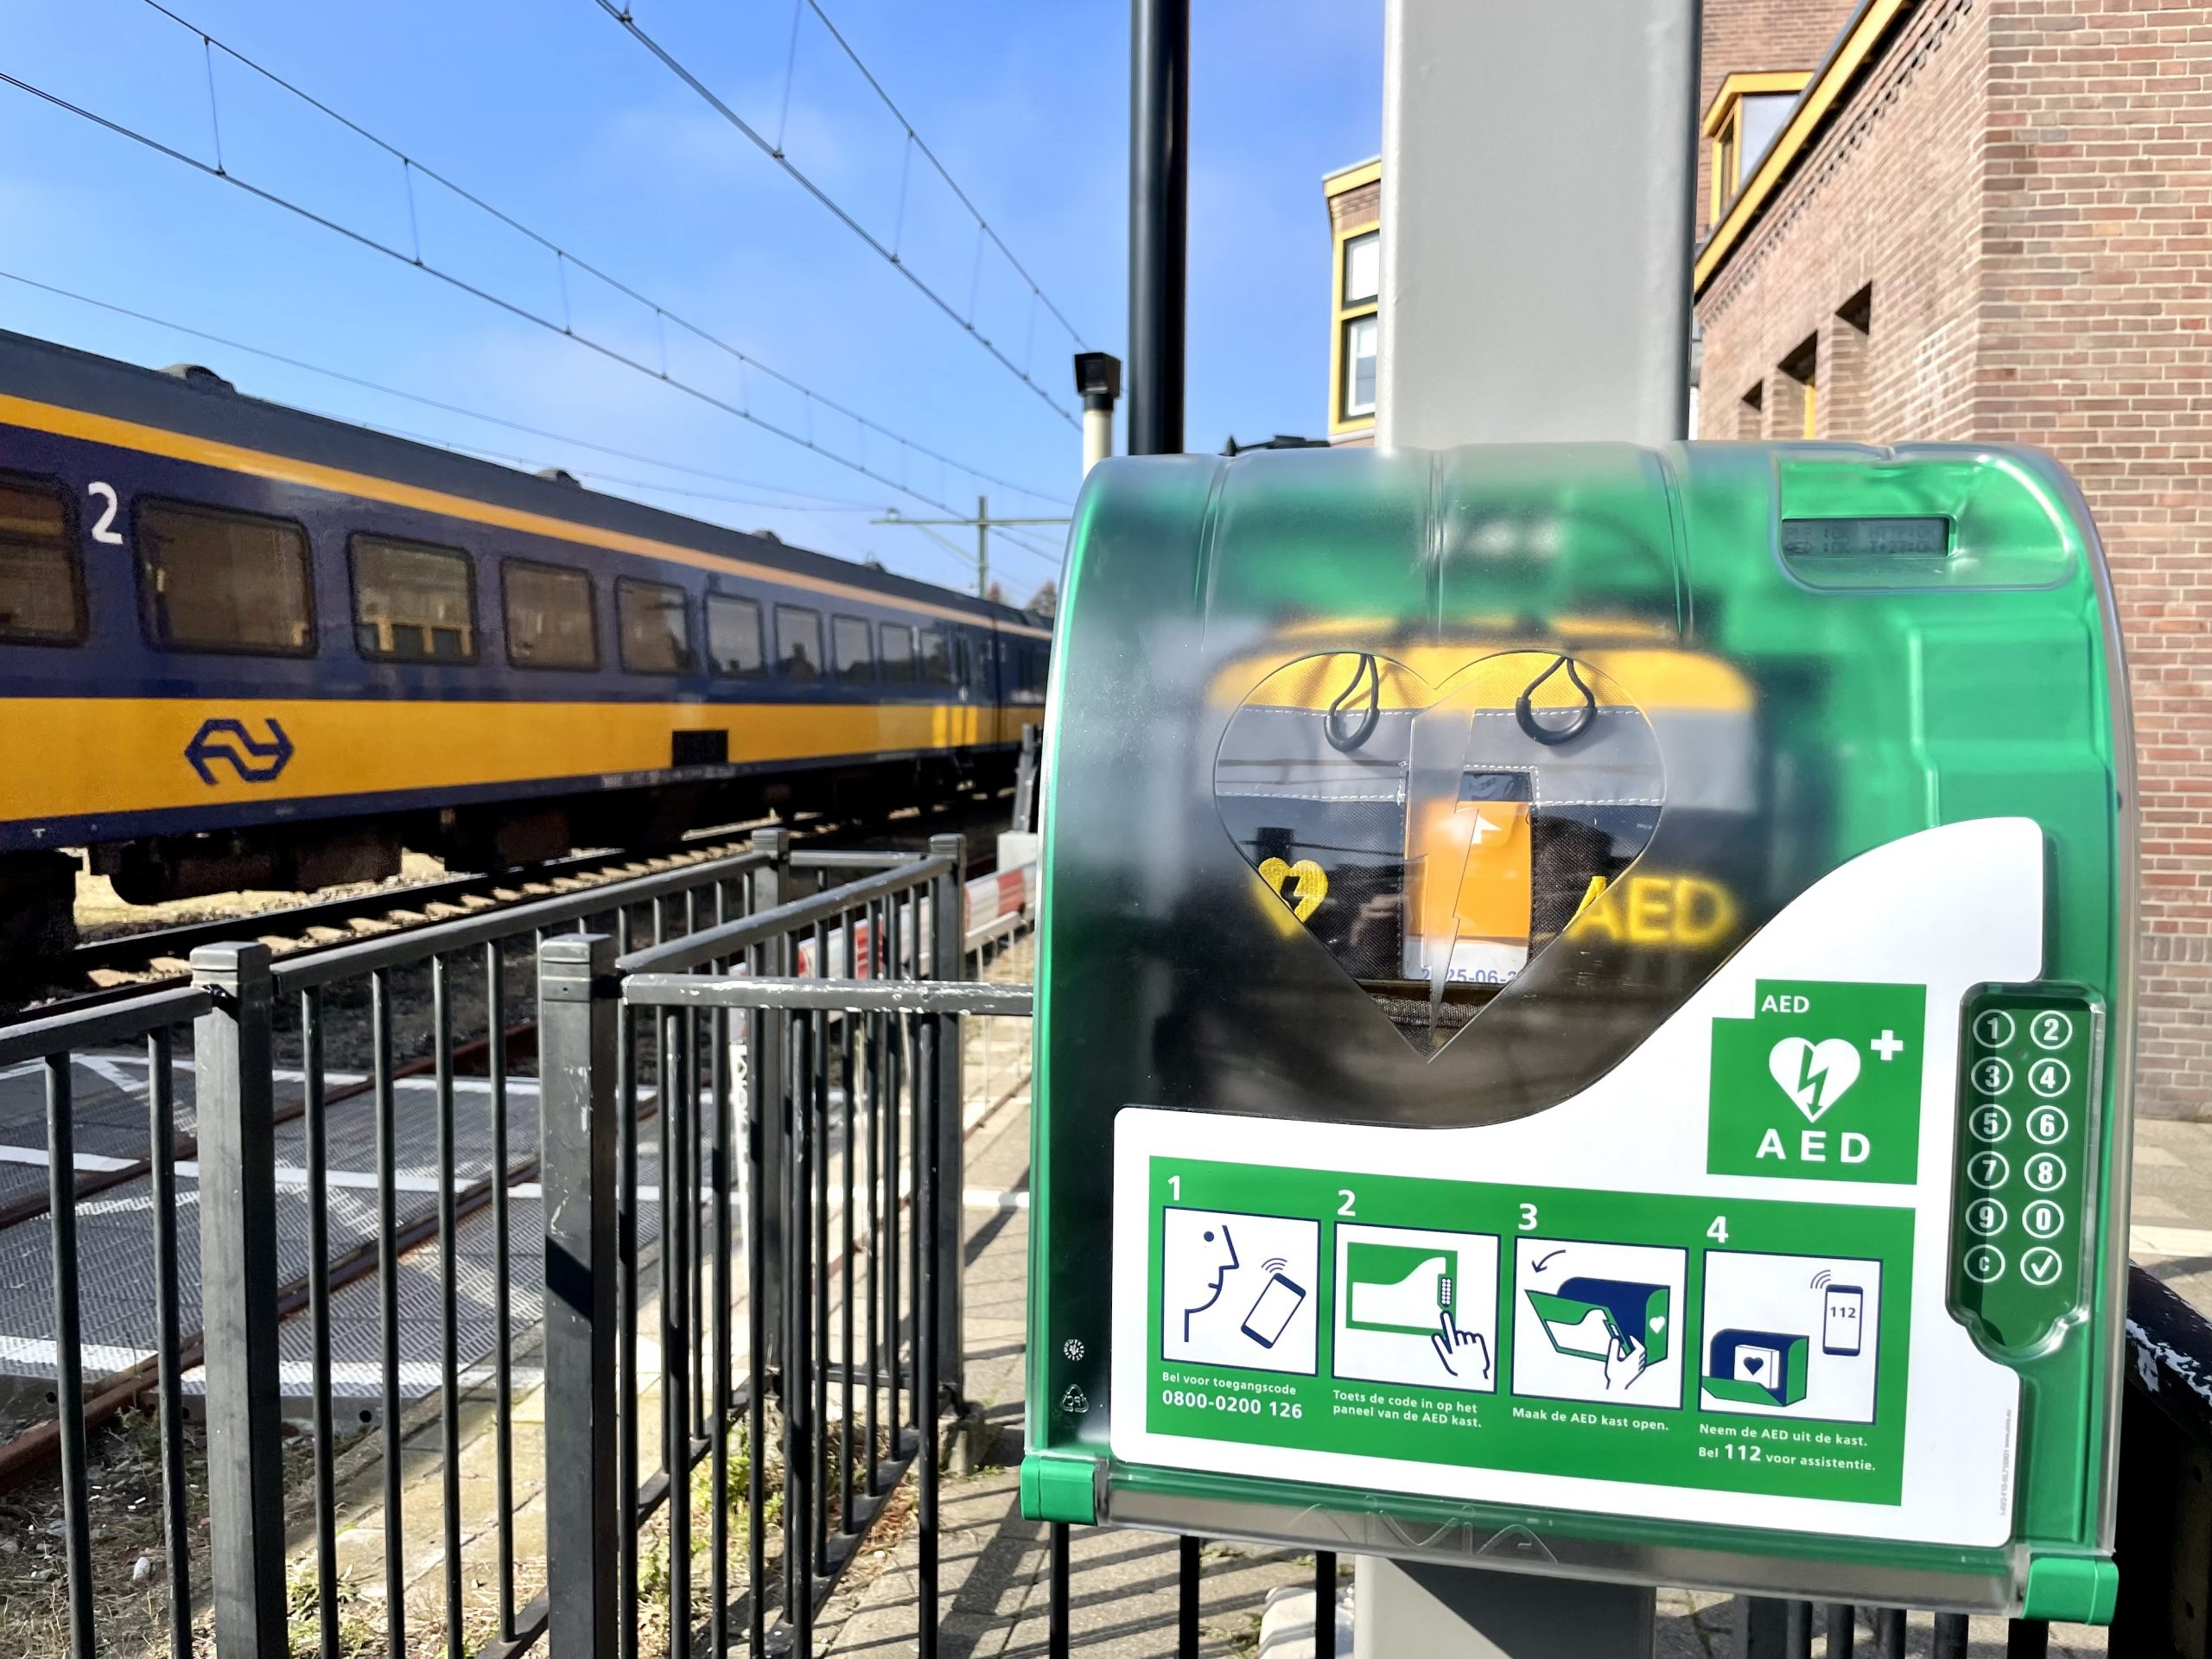 More and more stations in the Netherlands equipped with AED